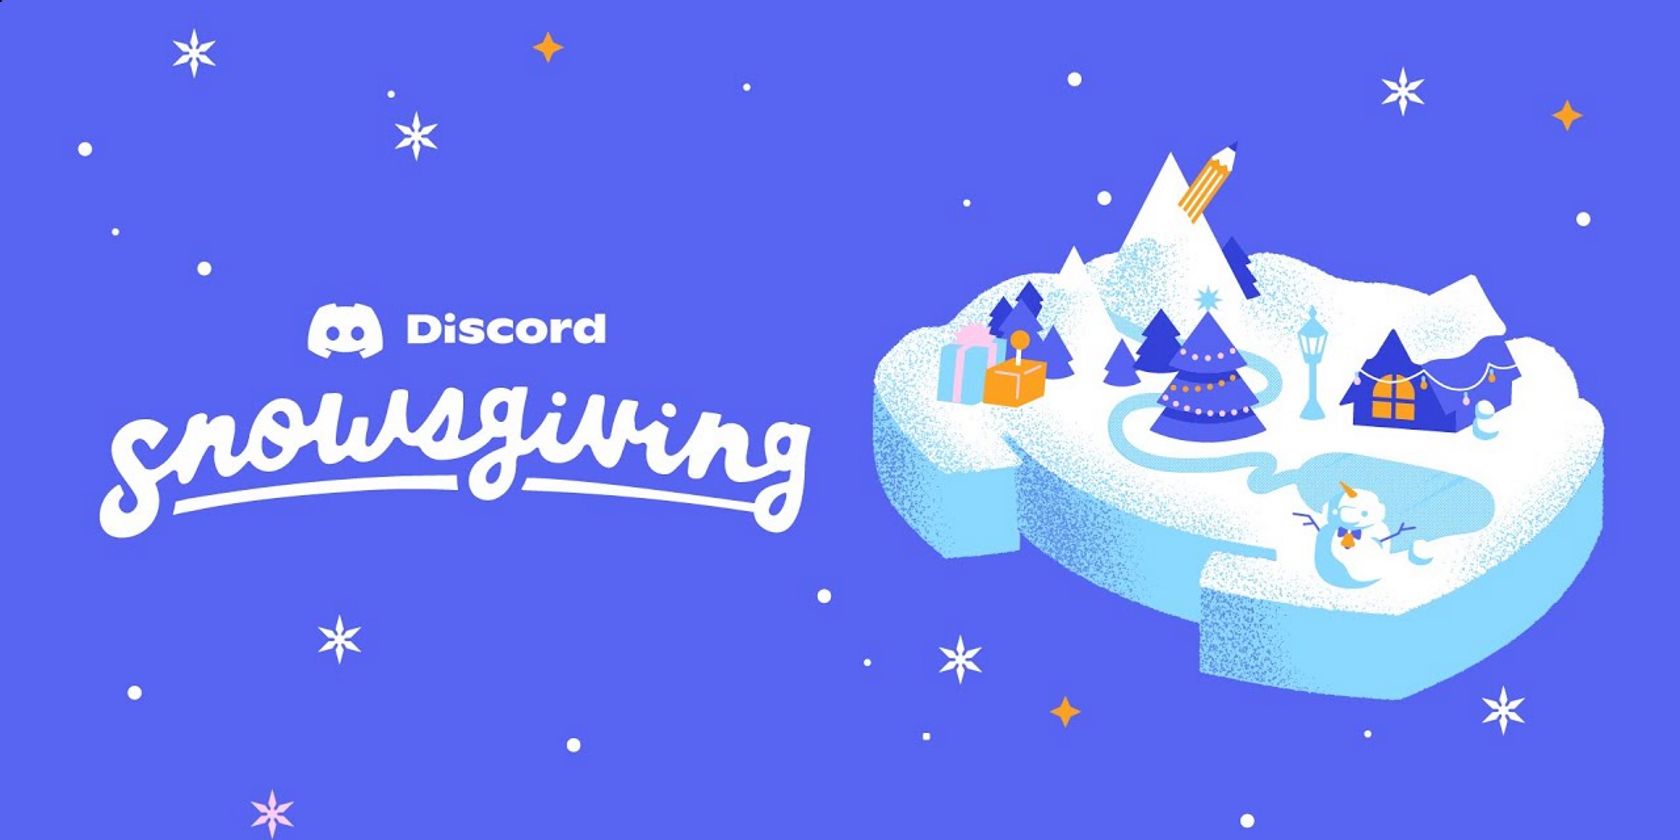 Discord - Snowsgiving's back & shaking things up this year️ ☃️ Join our  annual winter celebration where we host giveaways, contests, and bring in a  fresh new music bot for 24/7 nonstop